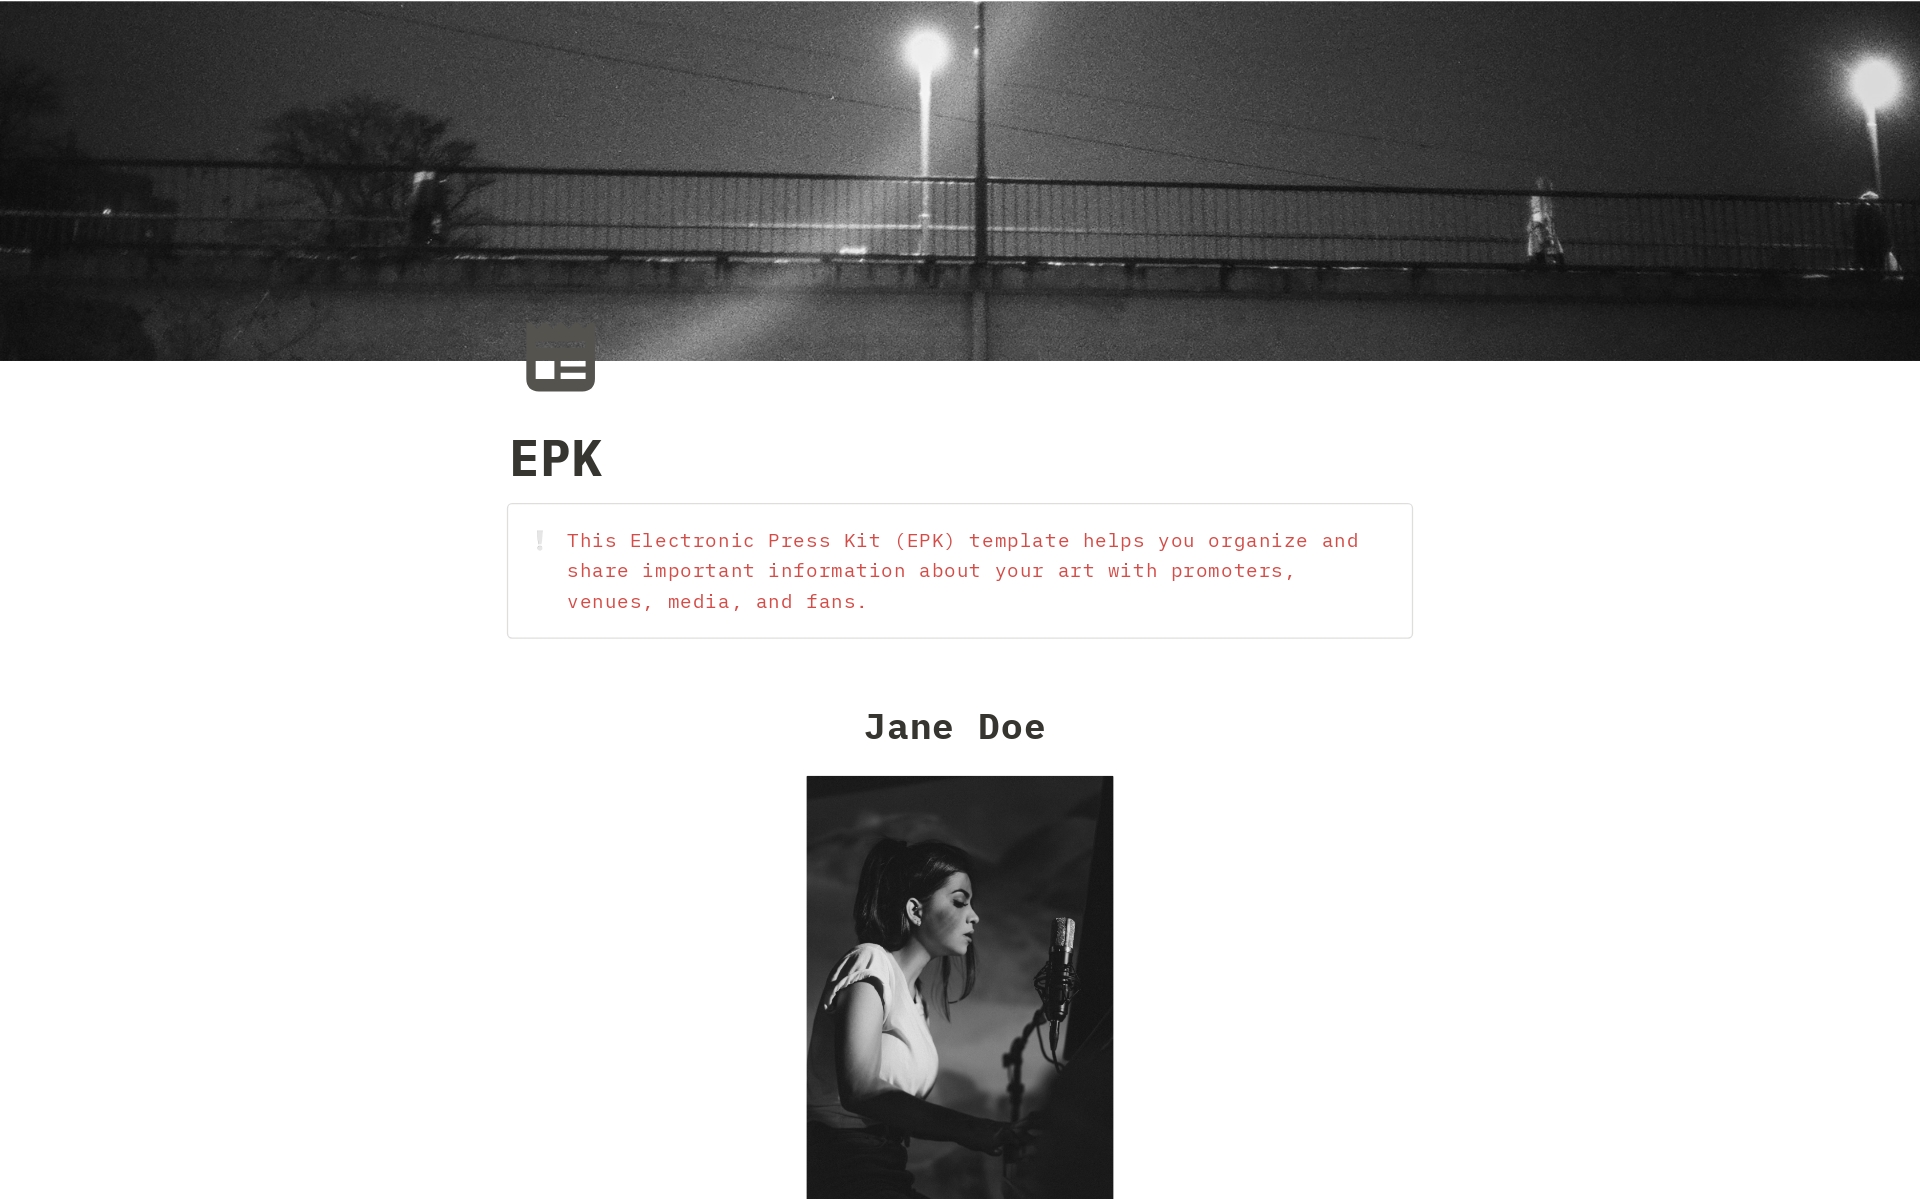 Supercharge Your Music Promotion with an Effortless EPK Notion Template

Ditch clunky EPK building tools. This Notion template simplifies the process, giving you a stunning, professional electronic press kit that gets you noticed by labels, media, and booking agents.